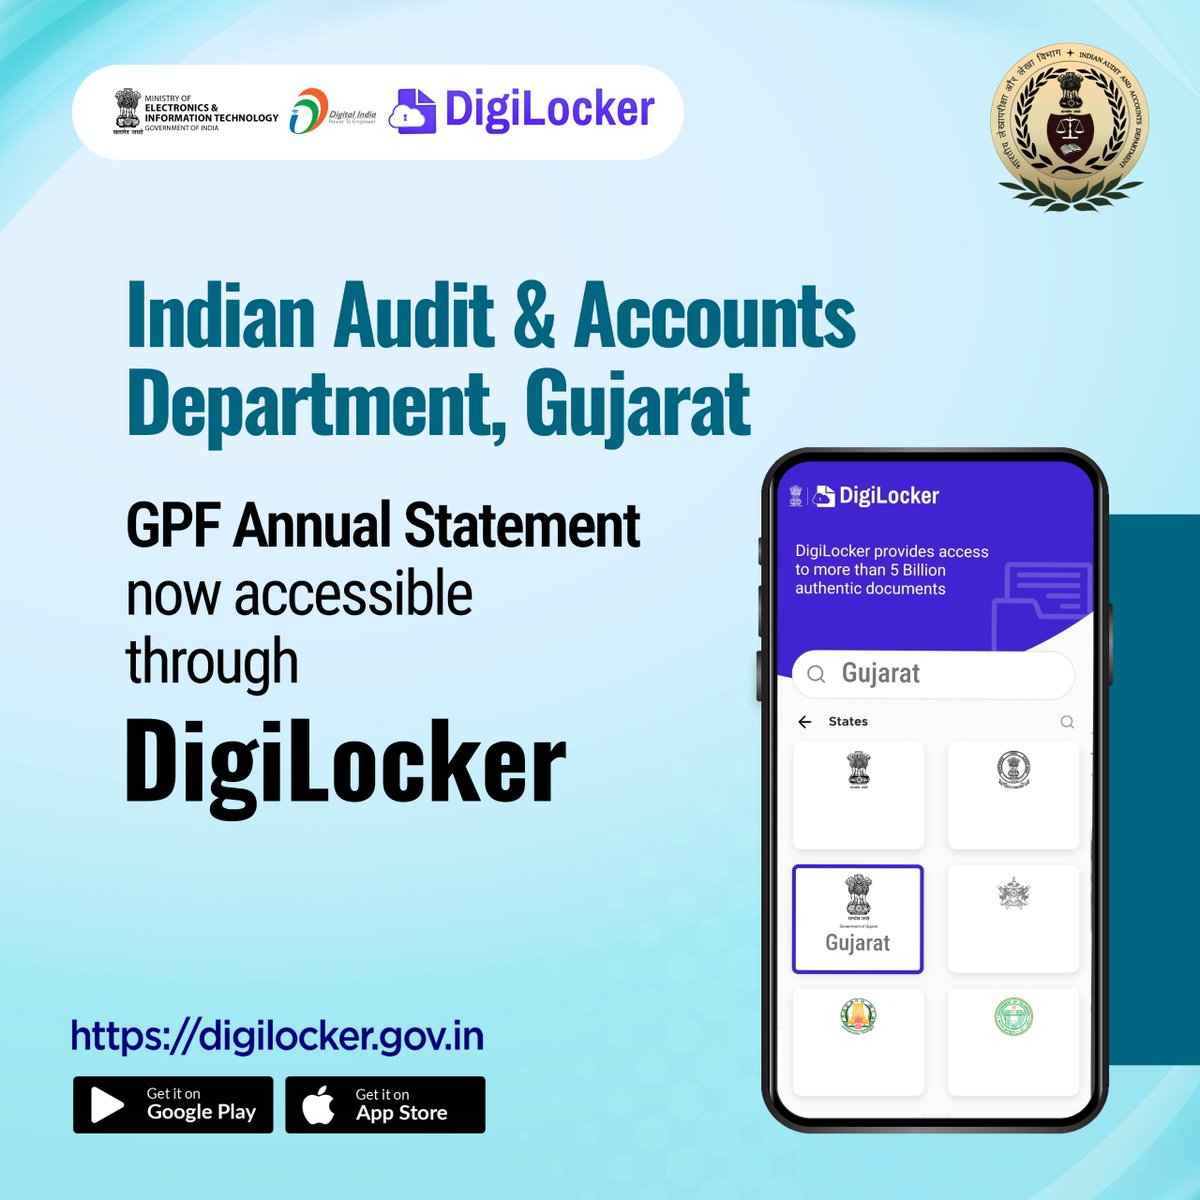 The Indian Audit & Accounts Department in #Gujarat now offers access to GPF Annual Statements through #DigiLocker, simplifying access to financial information for employees. Download App Now digilocker.gov.in/installapp